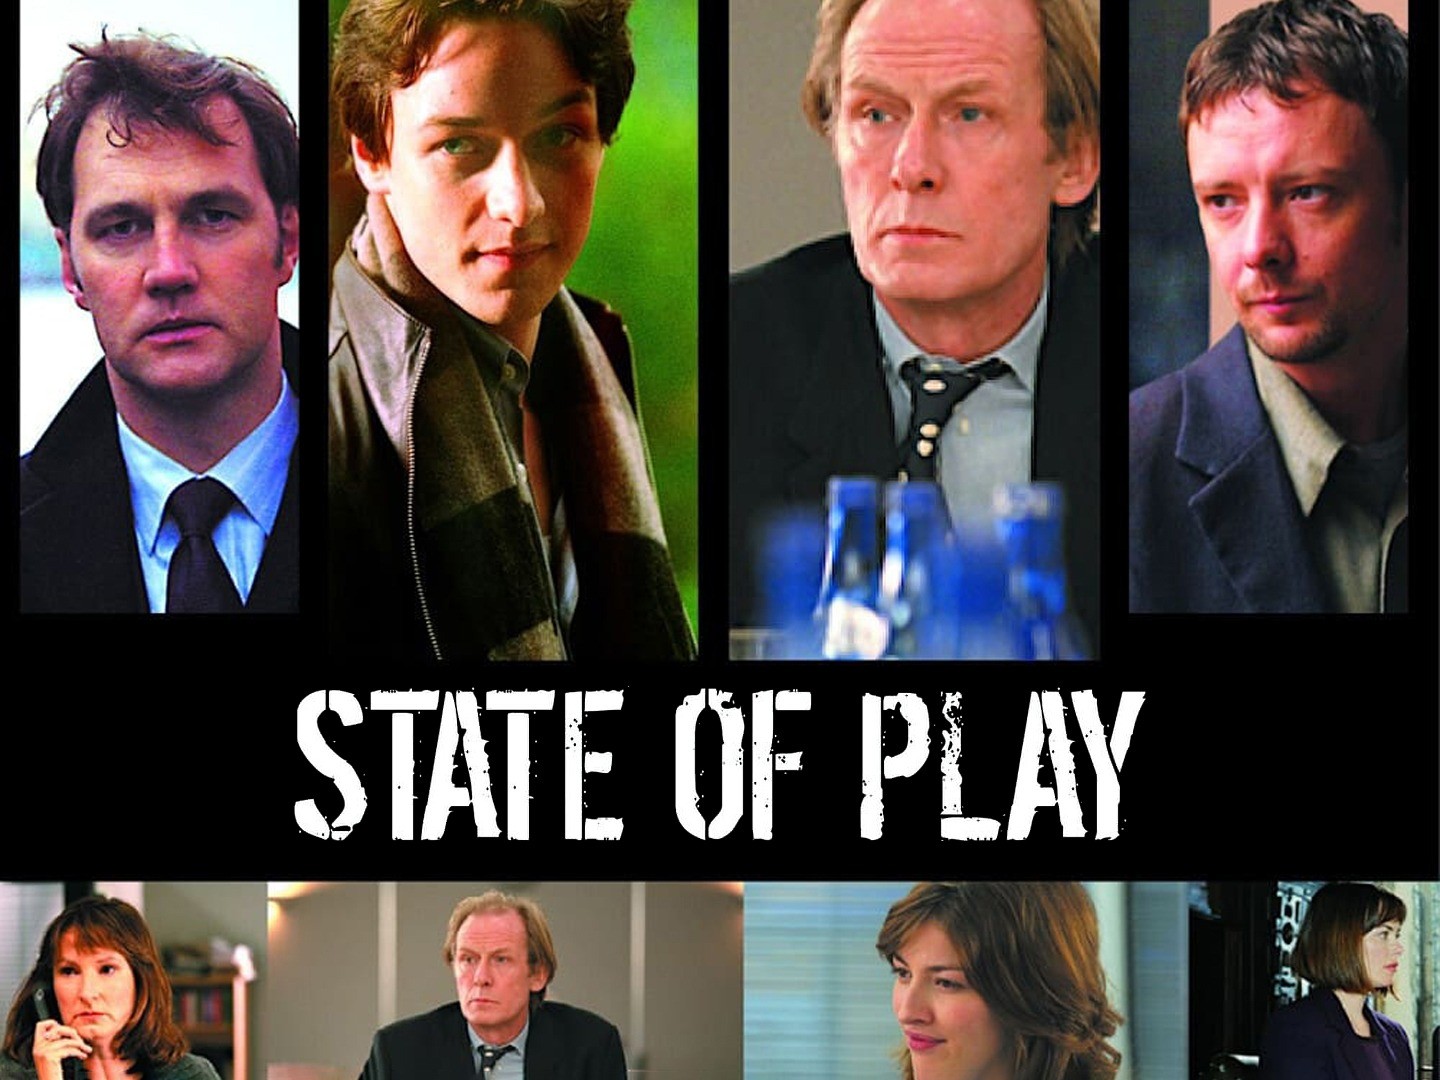 State of Play (TV series) - Wikipedia